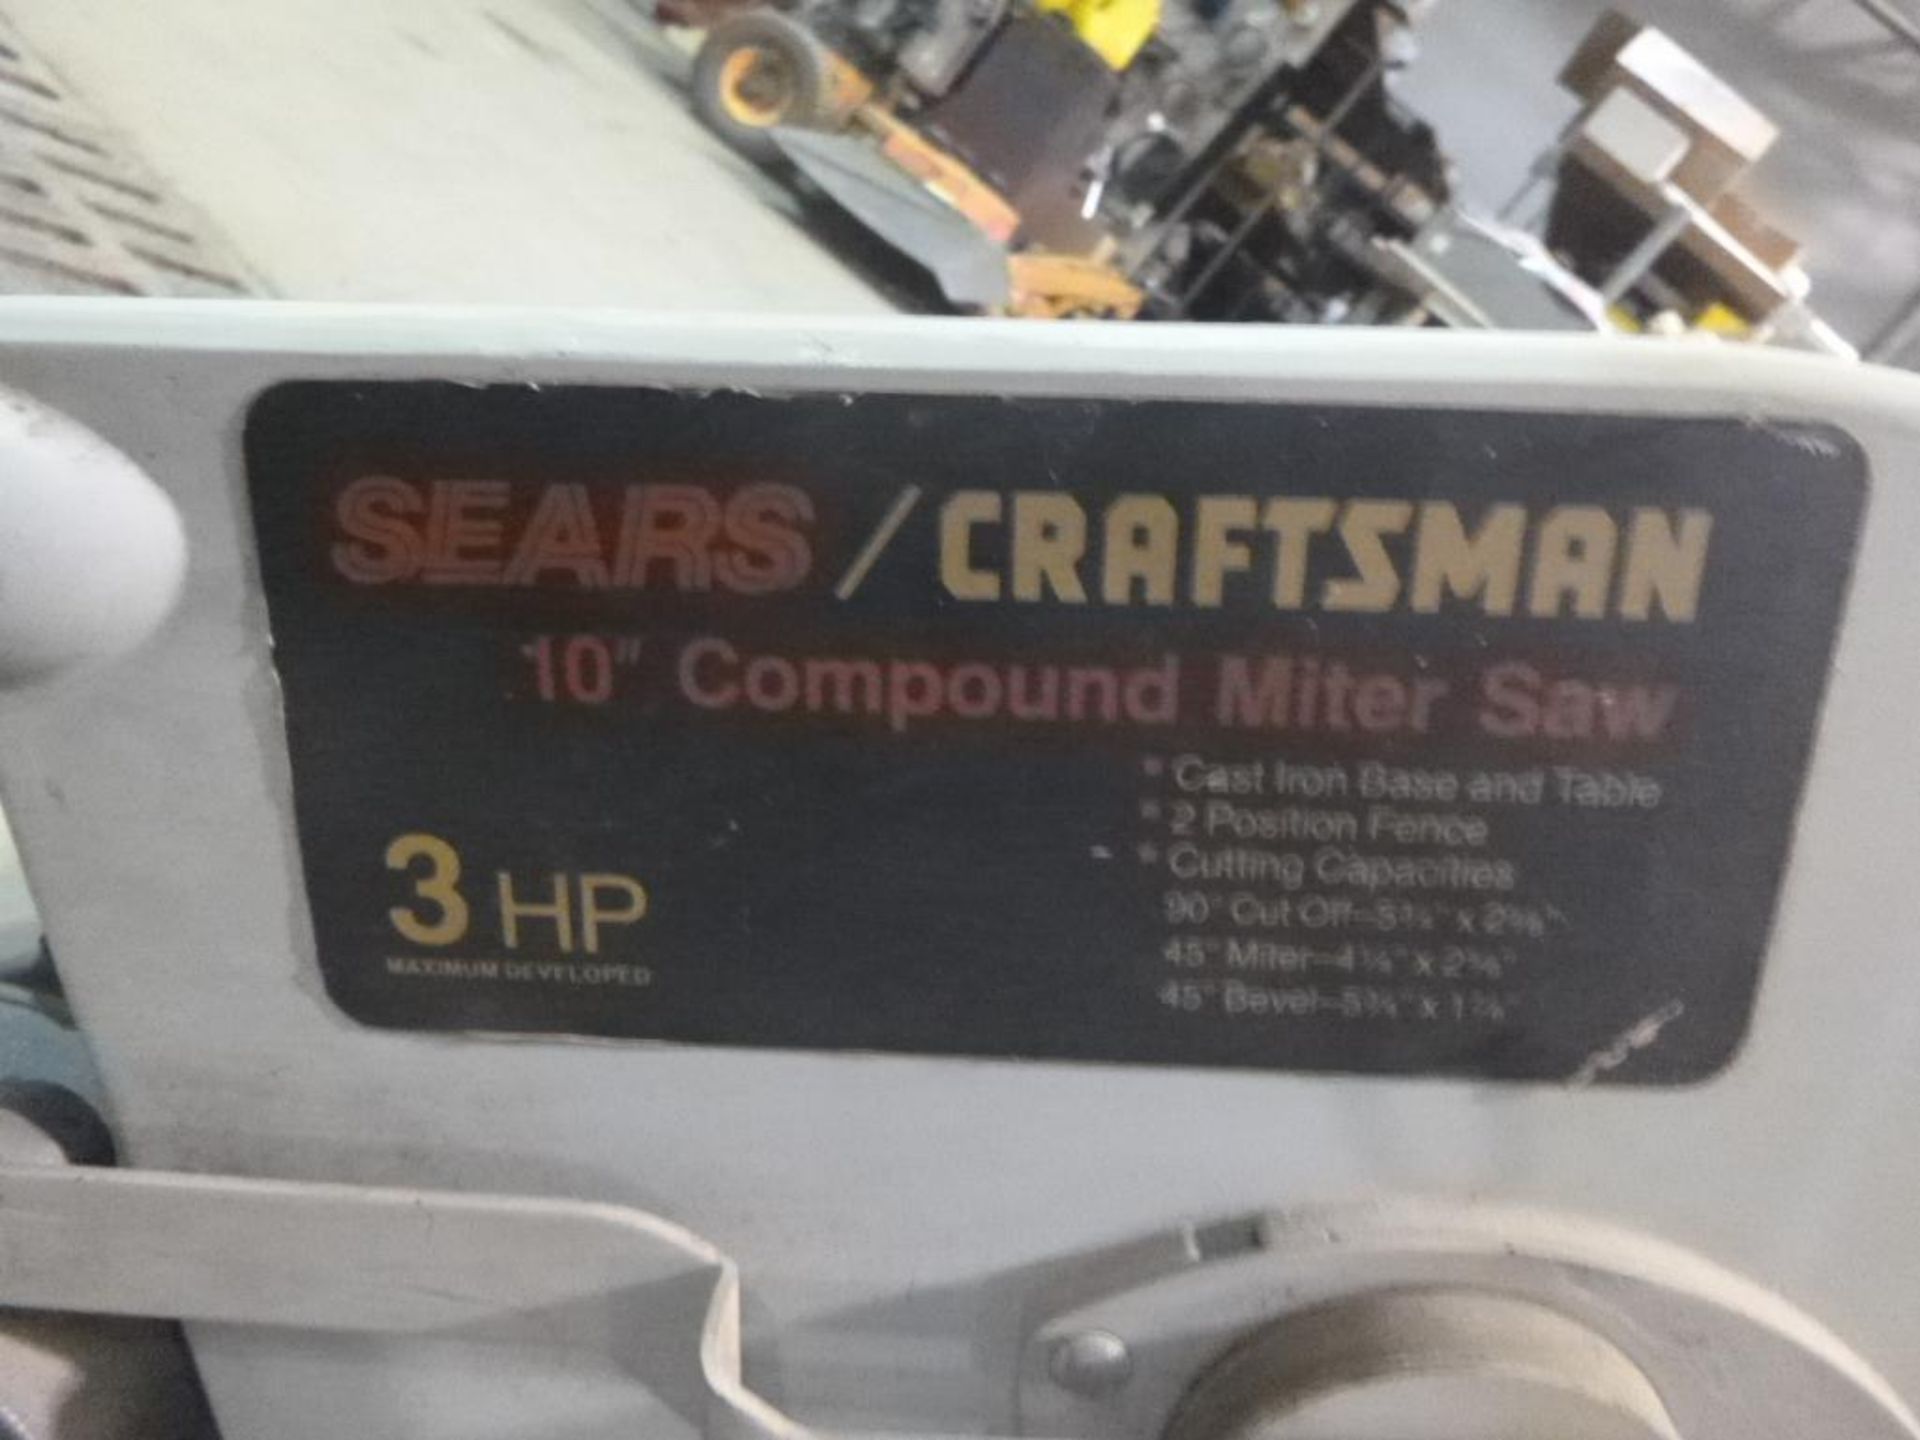 Saw, Miter Power 10 in. Compound, Craftsman Model 234600 - Image 2 of 4